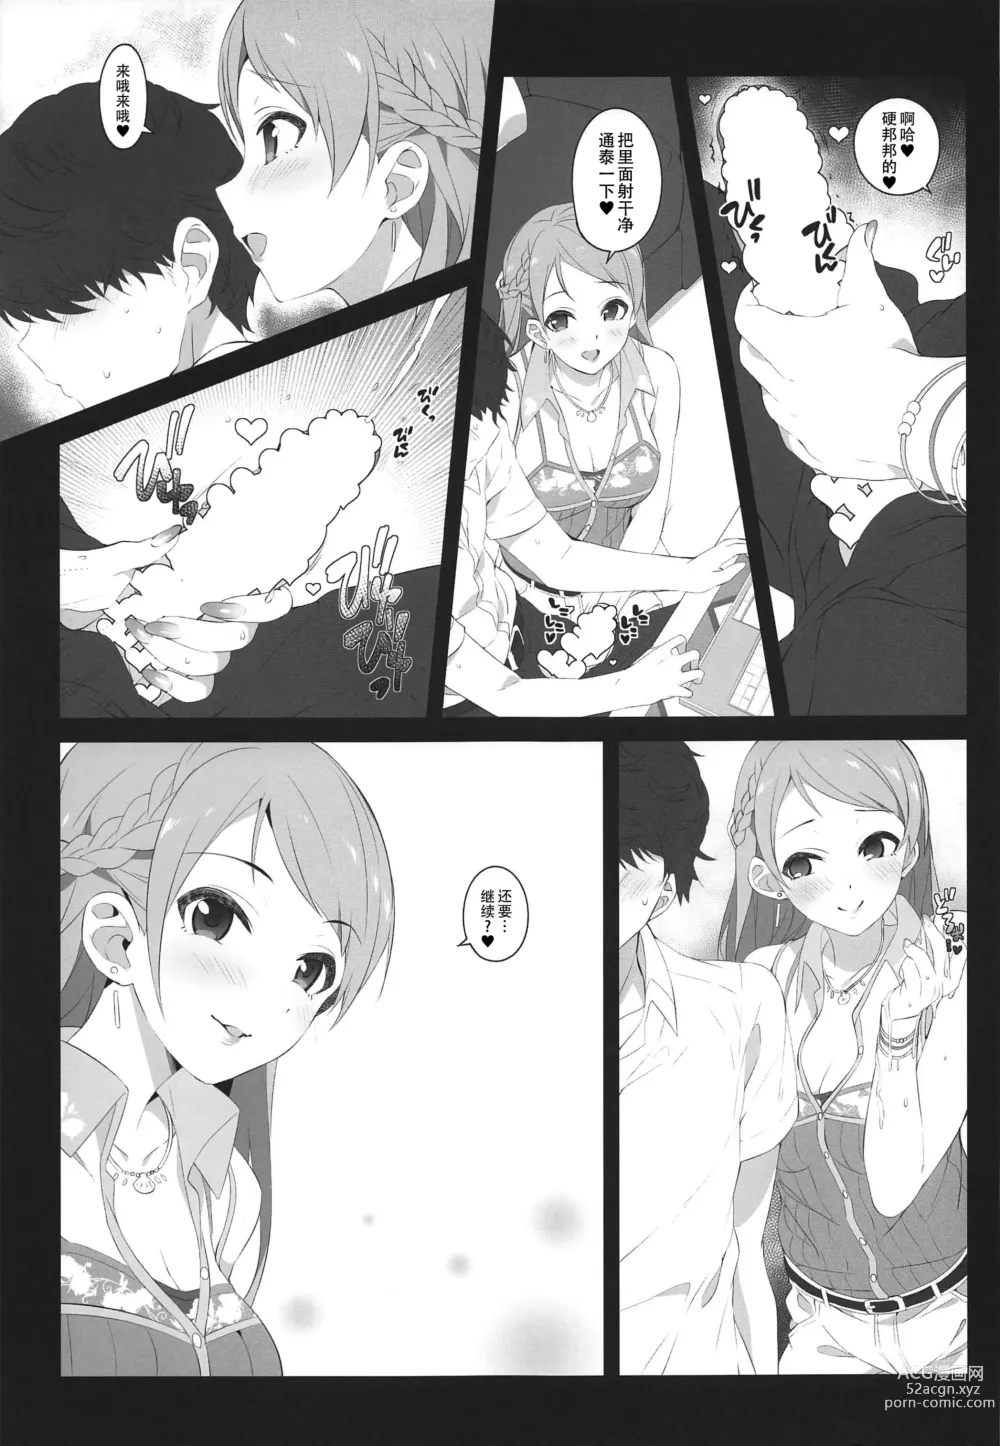 Page 15 of doujinshi Three stars have a dream with sparkles.